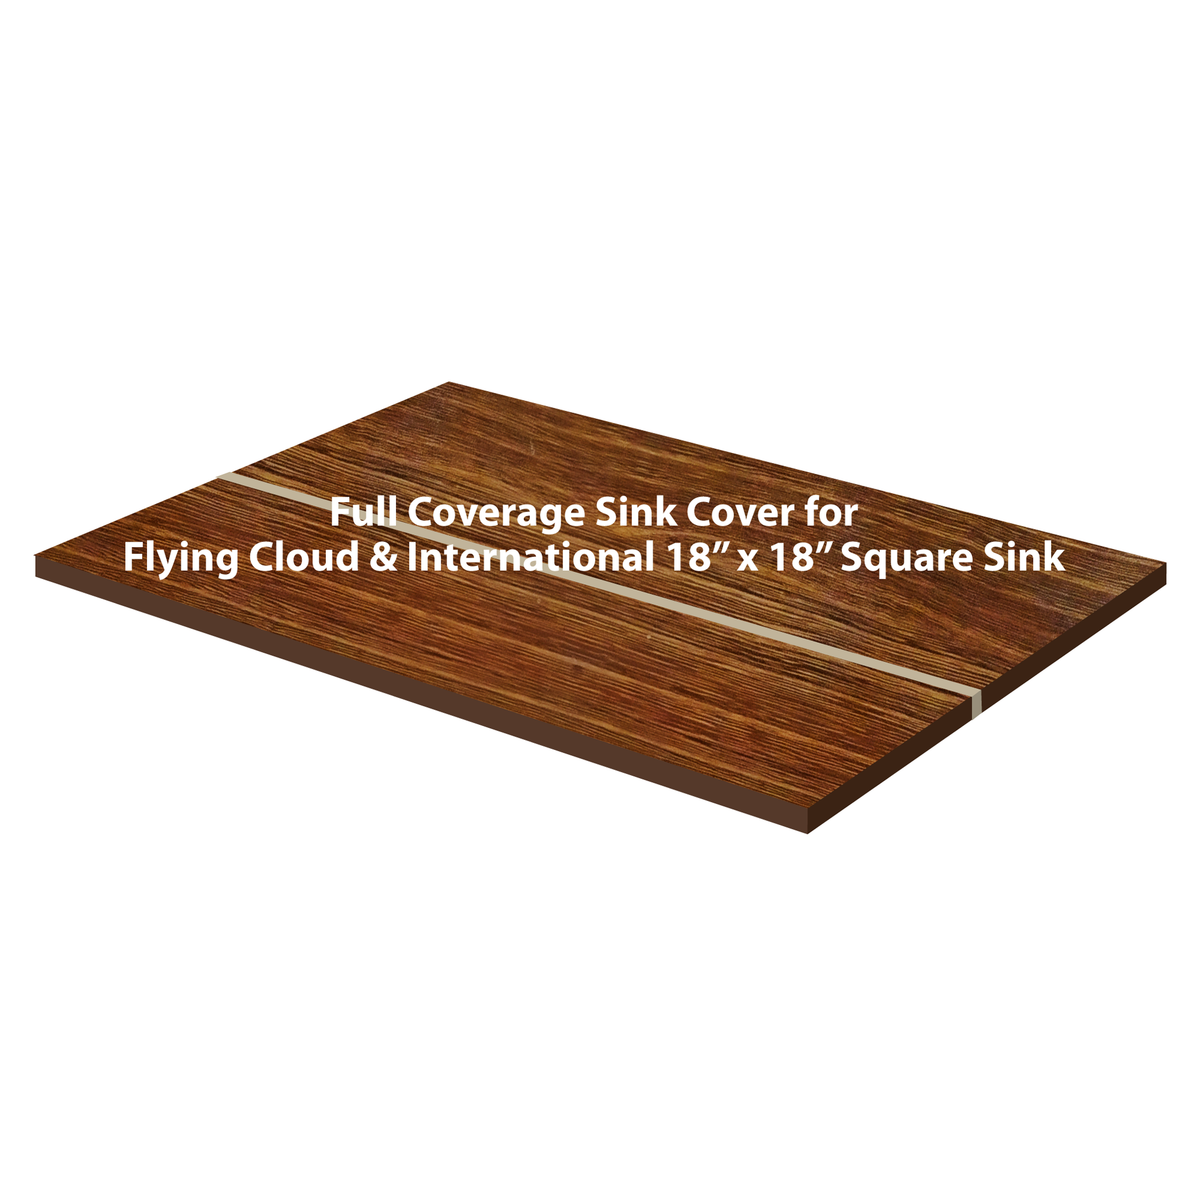 Airstream Sink Cover, Flying Cloud, International, 18'x18' Square